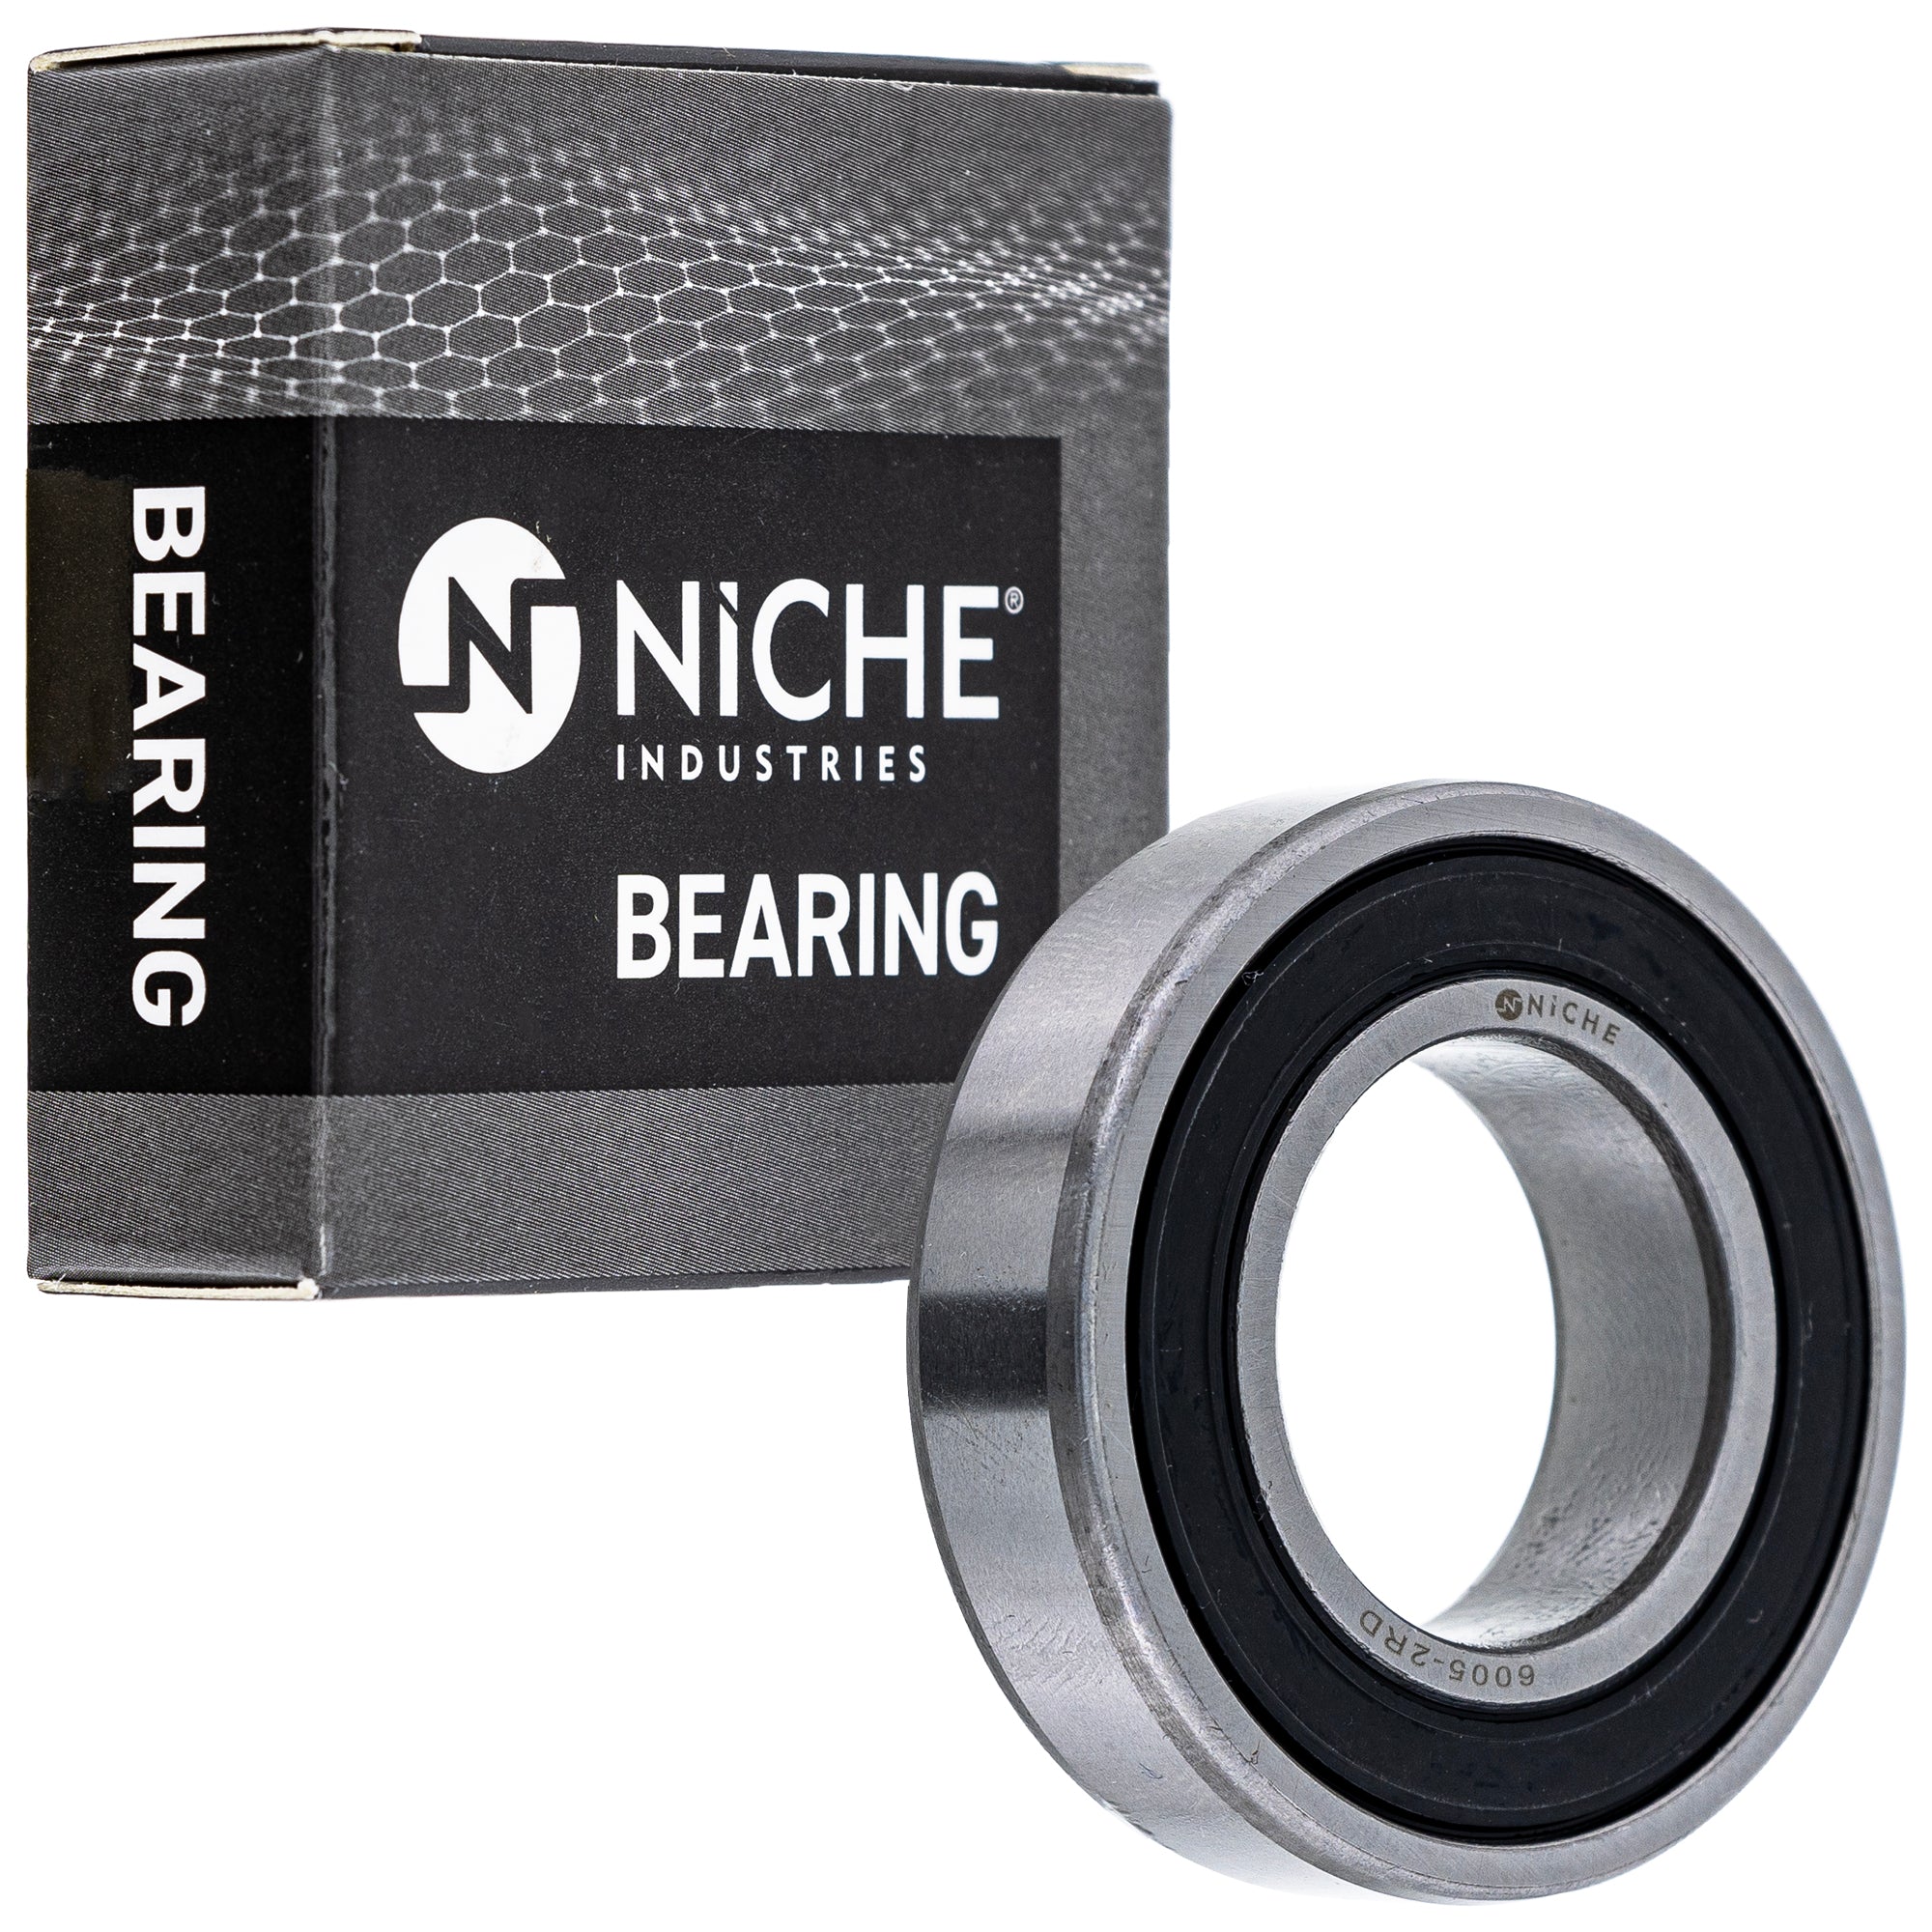 NICHE 519-CBB2339R Bearing for zOTHER RC51 Pro K1100RS K1100LT